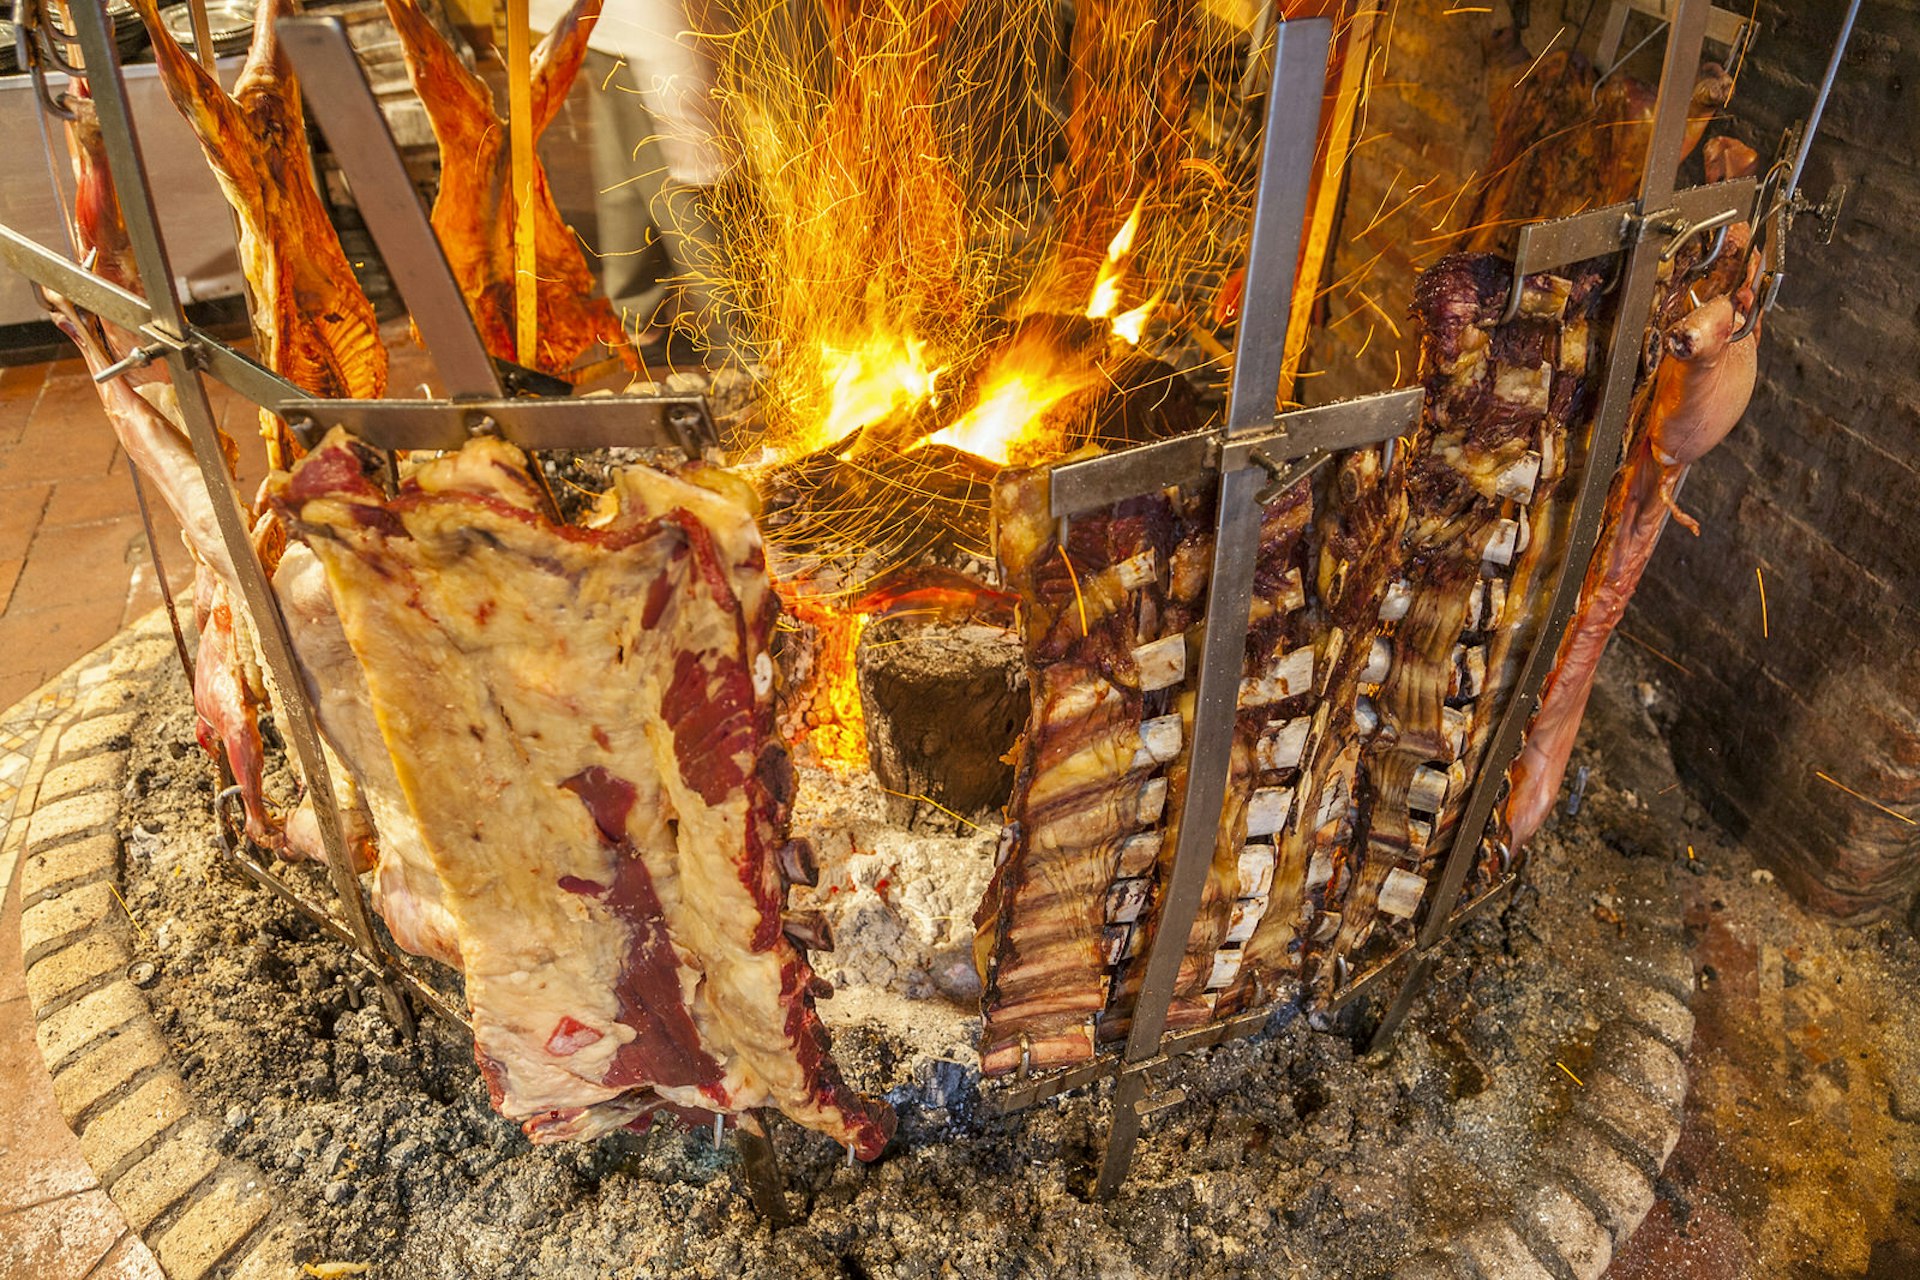  A meat feast cooking over an open flame on a parrilla in Buenos Aires © Stuart Dee / Getty Images